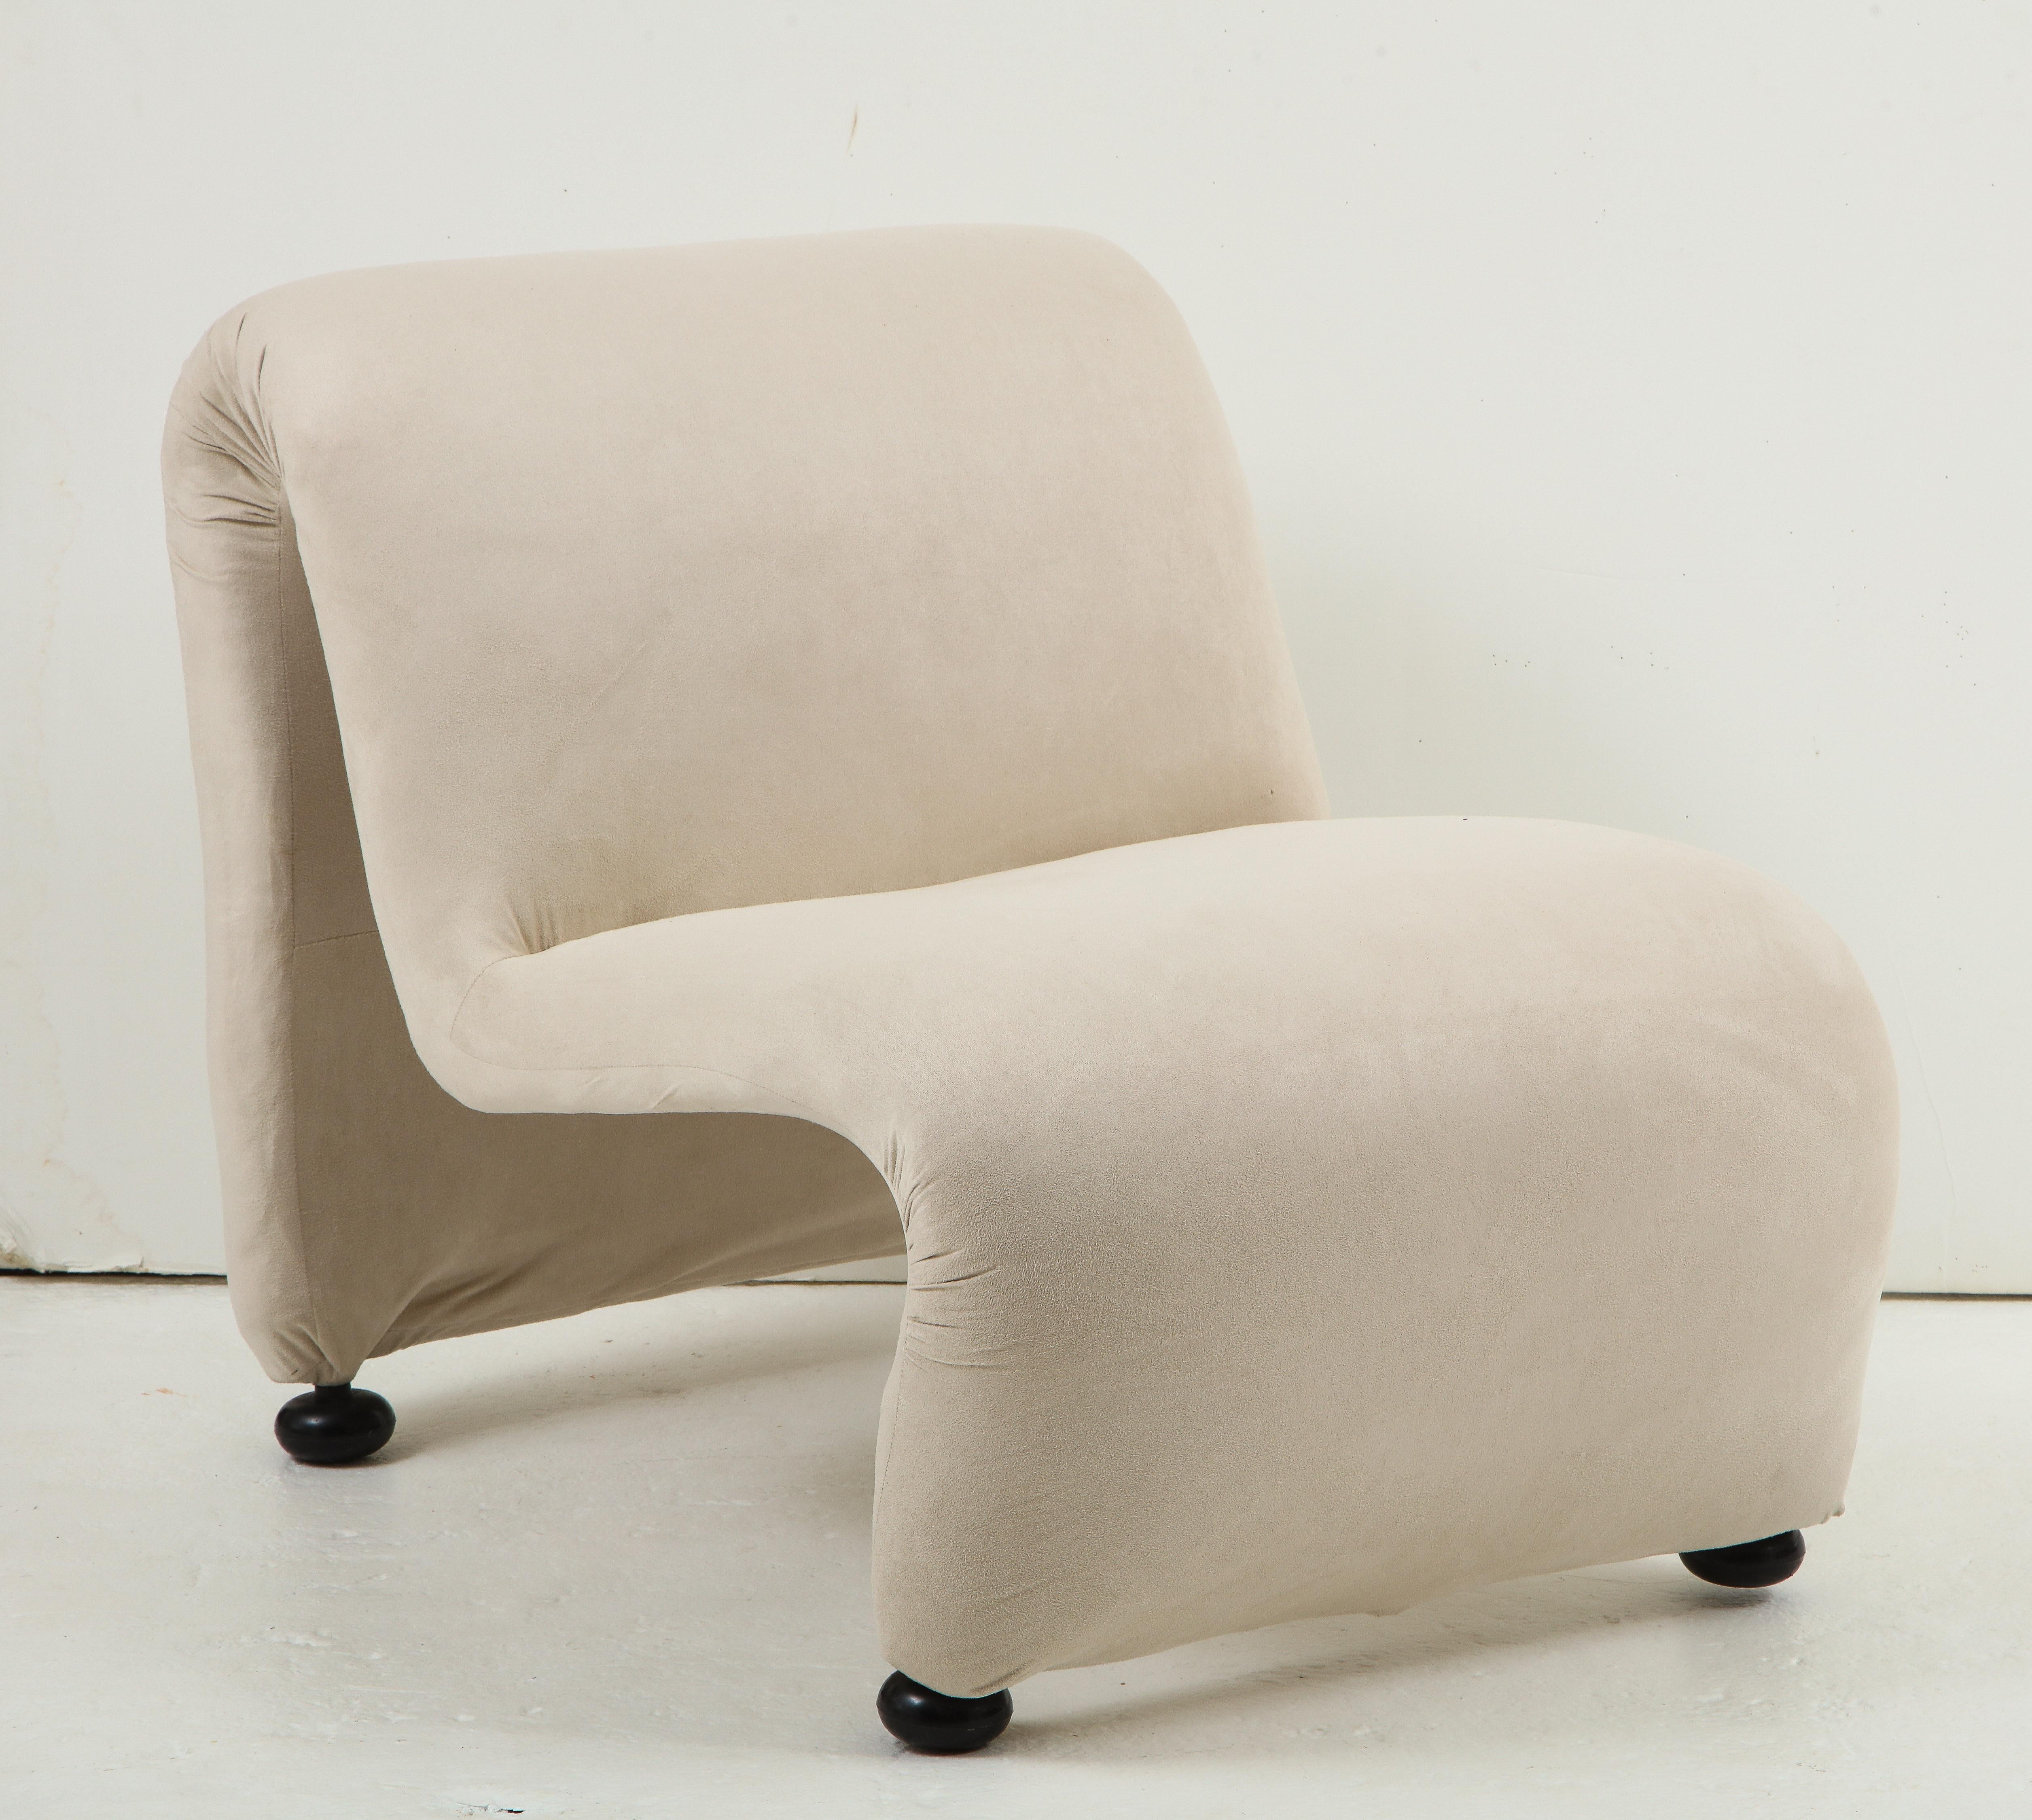 French Sculptural Etienne Fermigier Lounge Chairs, White, 1970s, France